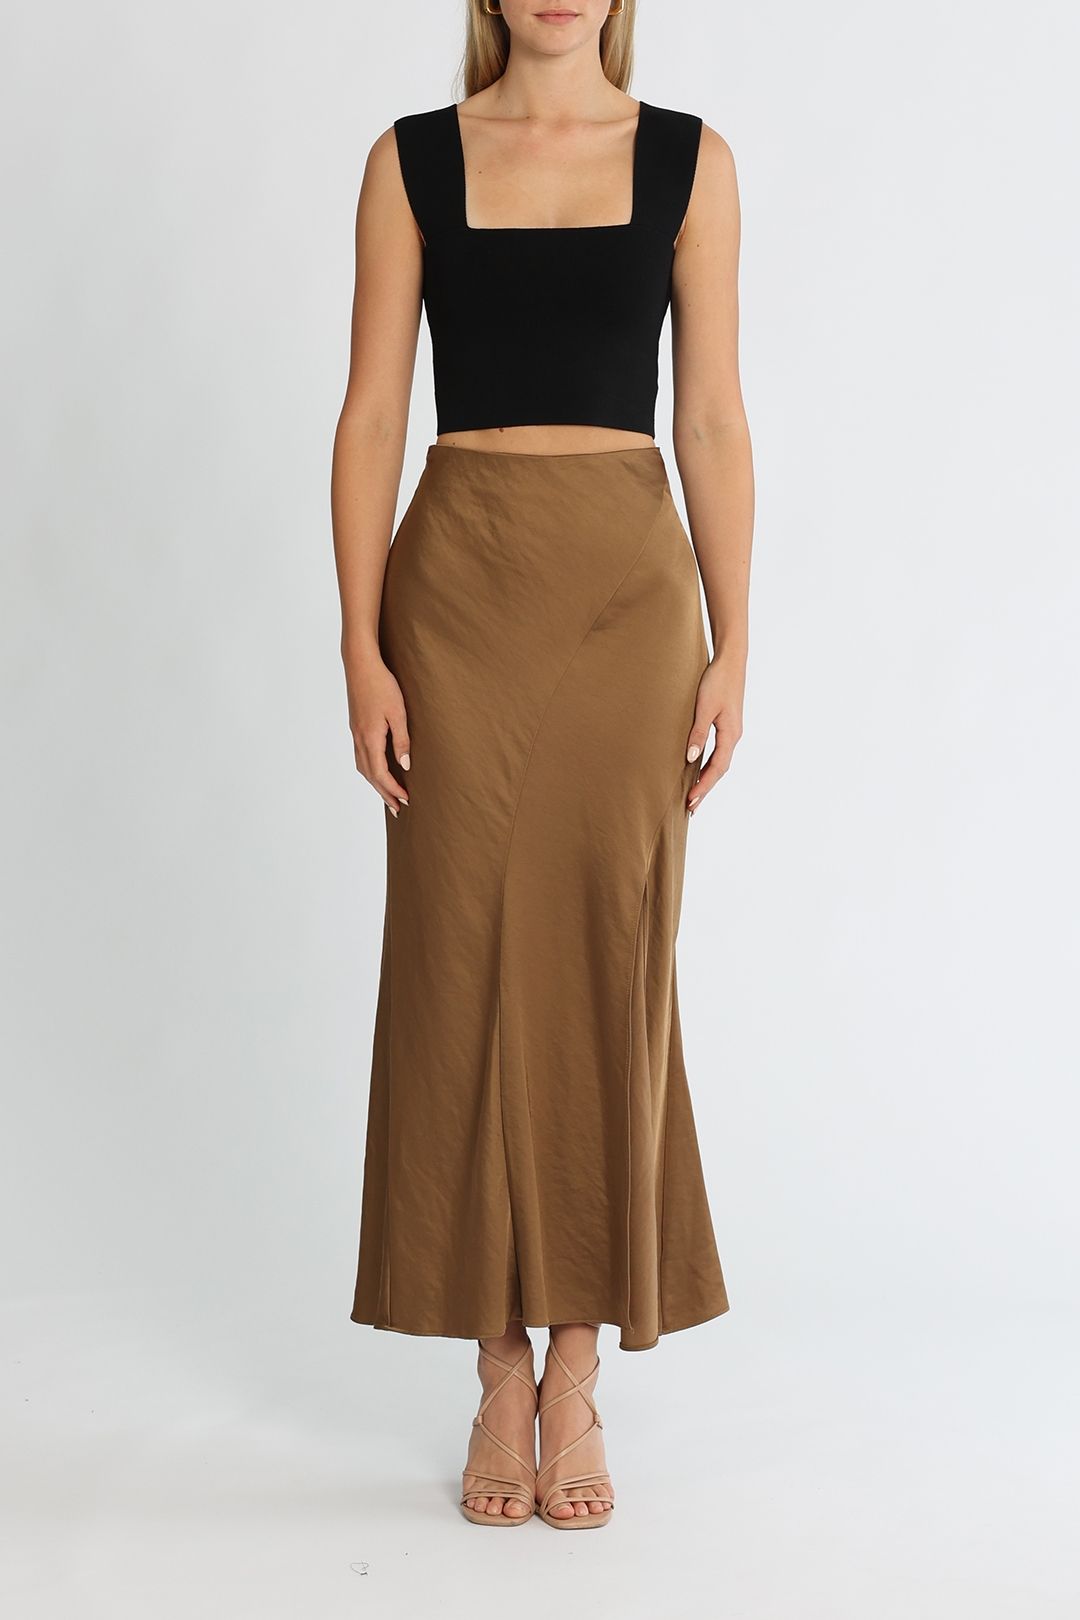 Significant Other Mimi Skirt Dark Gold